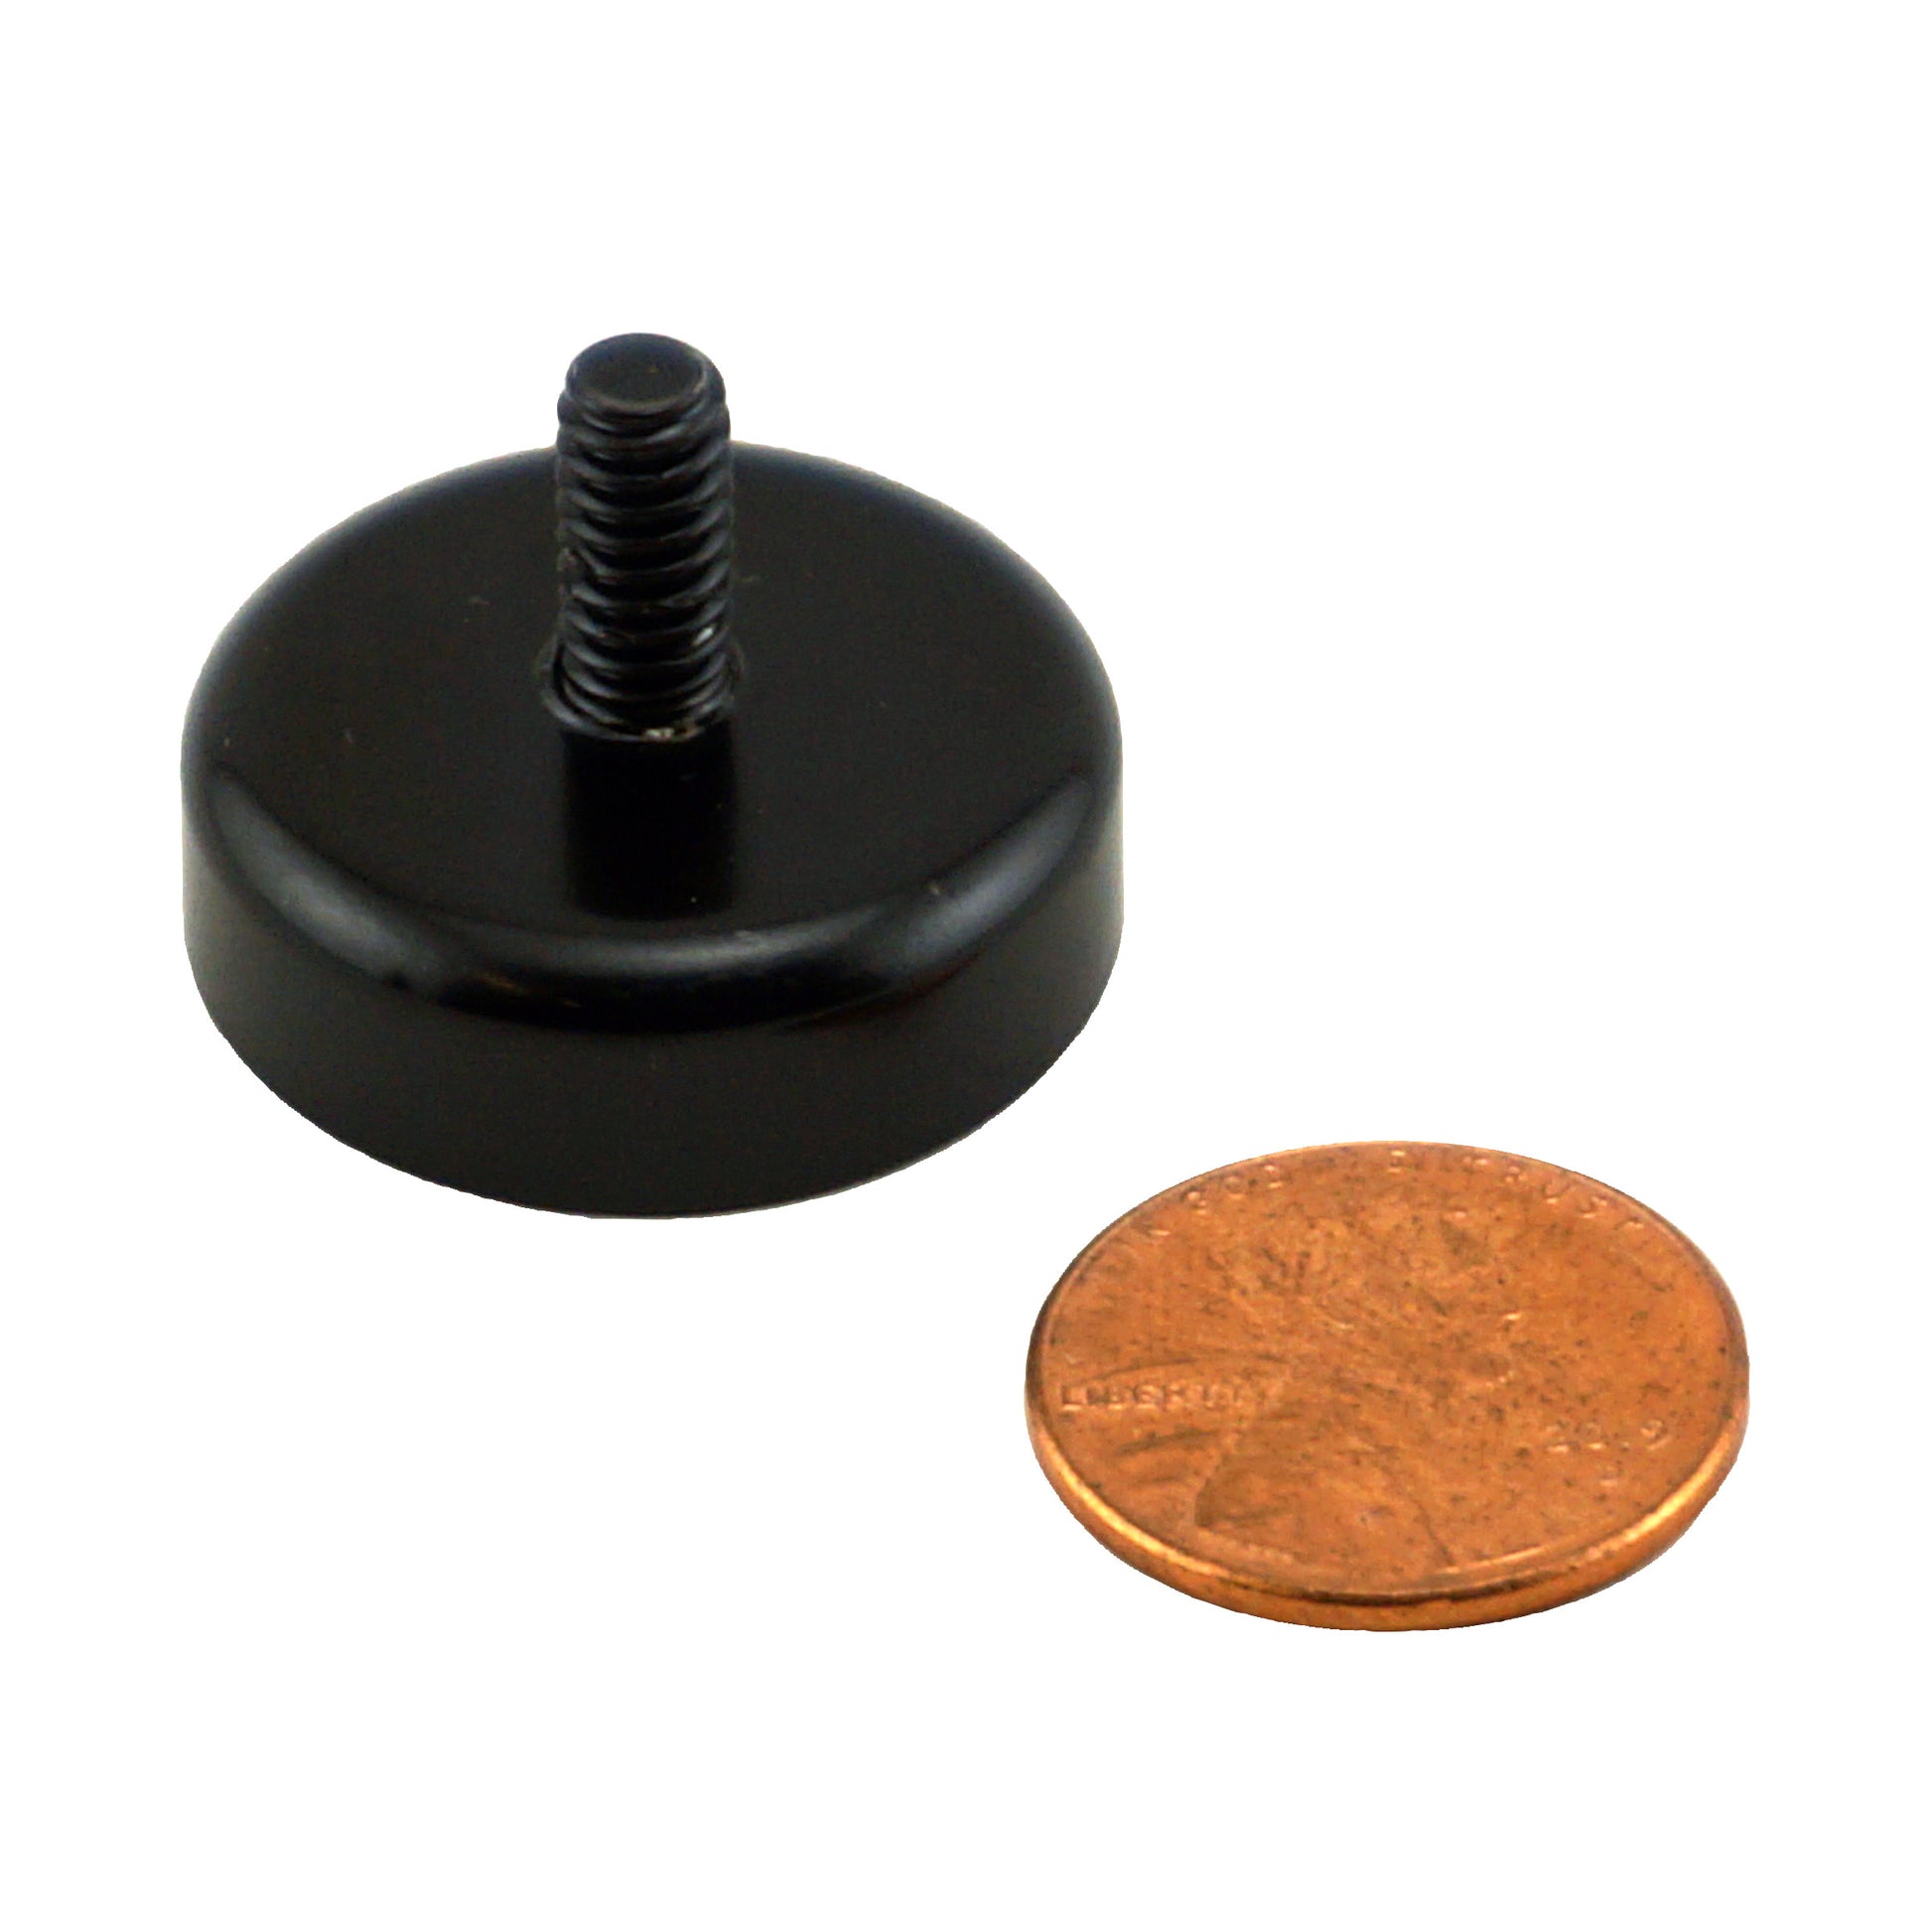 Load image into Gallery viewer, CACM098BPC Ceramic Round Base Magnet with Male Thread - Compared to Penny for Size Reference